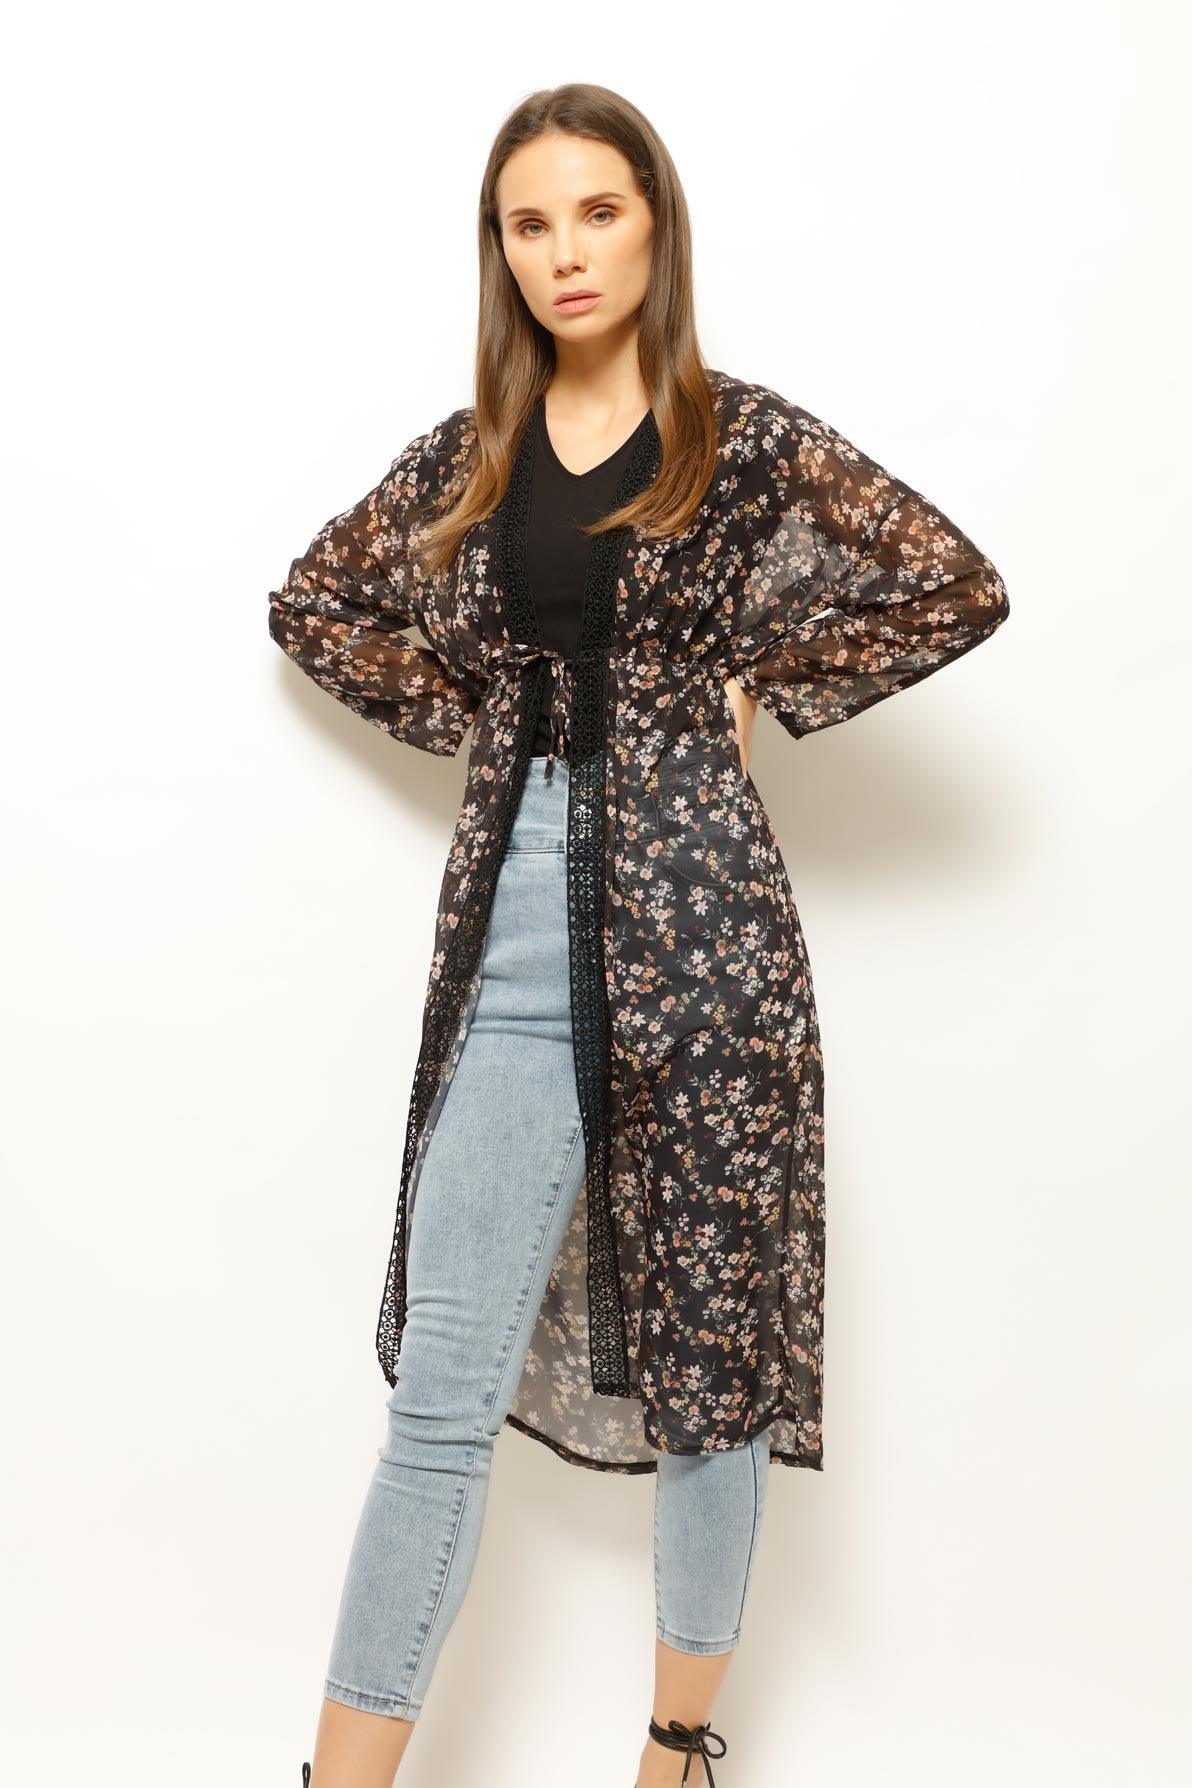 HIRKA FLOWY FLORAL CARDIGAN, CARDIGAN, CORADO, be unique, black, cardigan, corado fashion, coradomoda, FASHION, floral, flowy, lace, lifestyle, made in turkey, new collection, see through, statement, style, tie, top, women, women's fashion, coradomoda, coradomoda.com